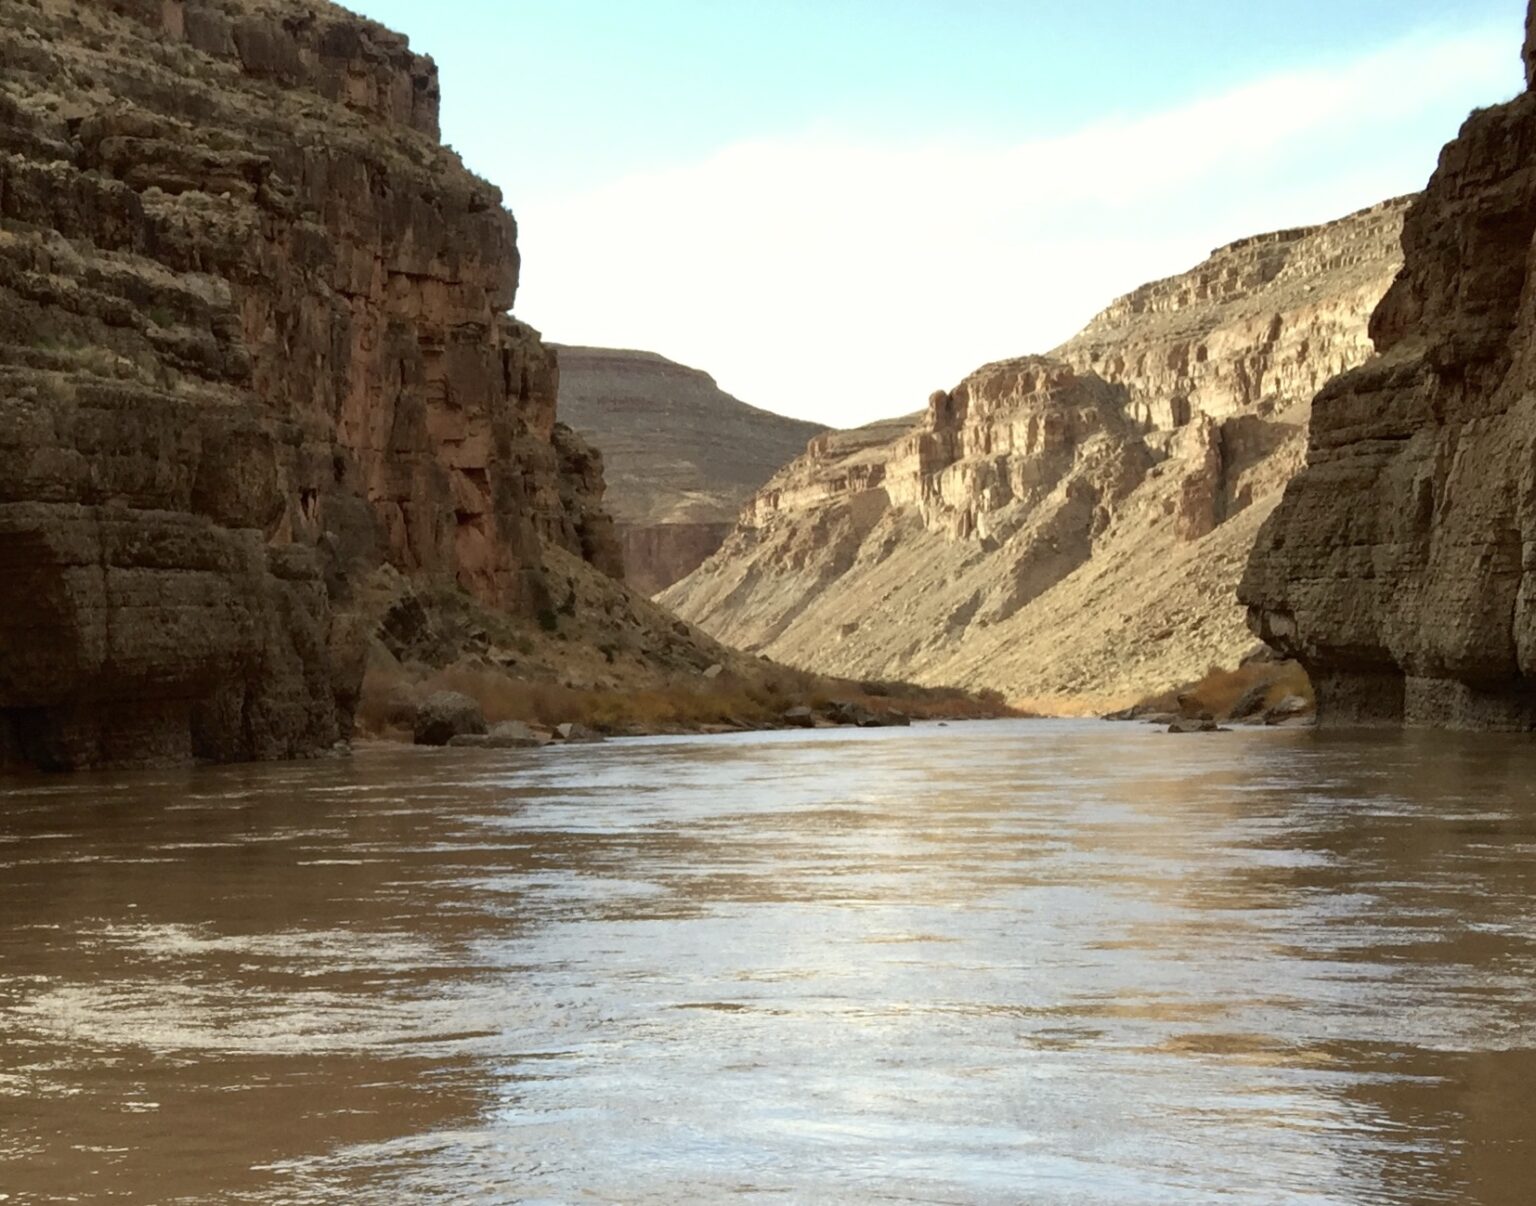 The San Juan river hugs the northern boundary of the Navajo Nation. Image/Marjorie Childress